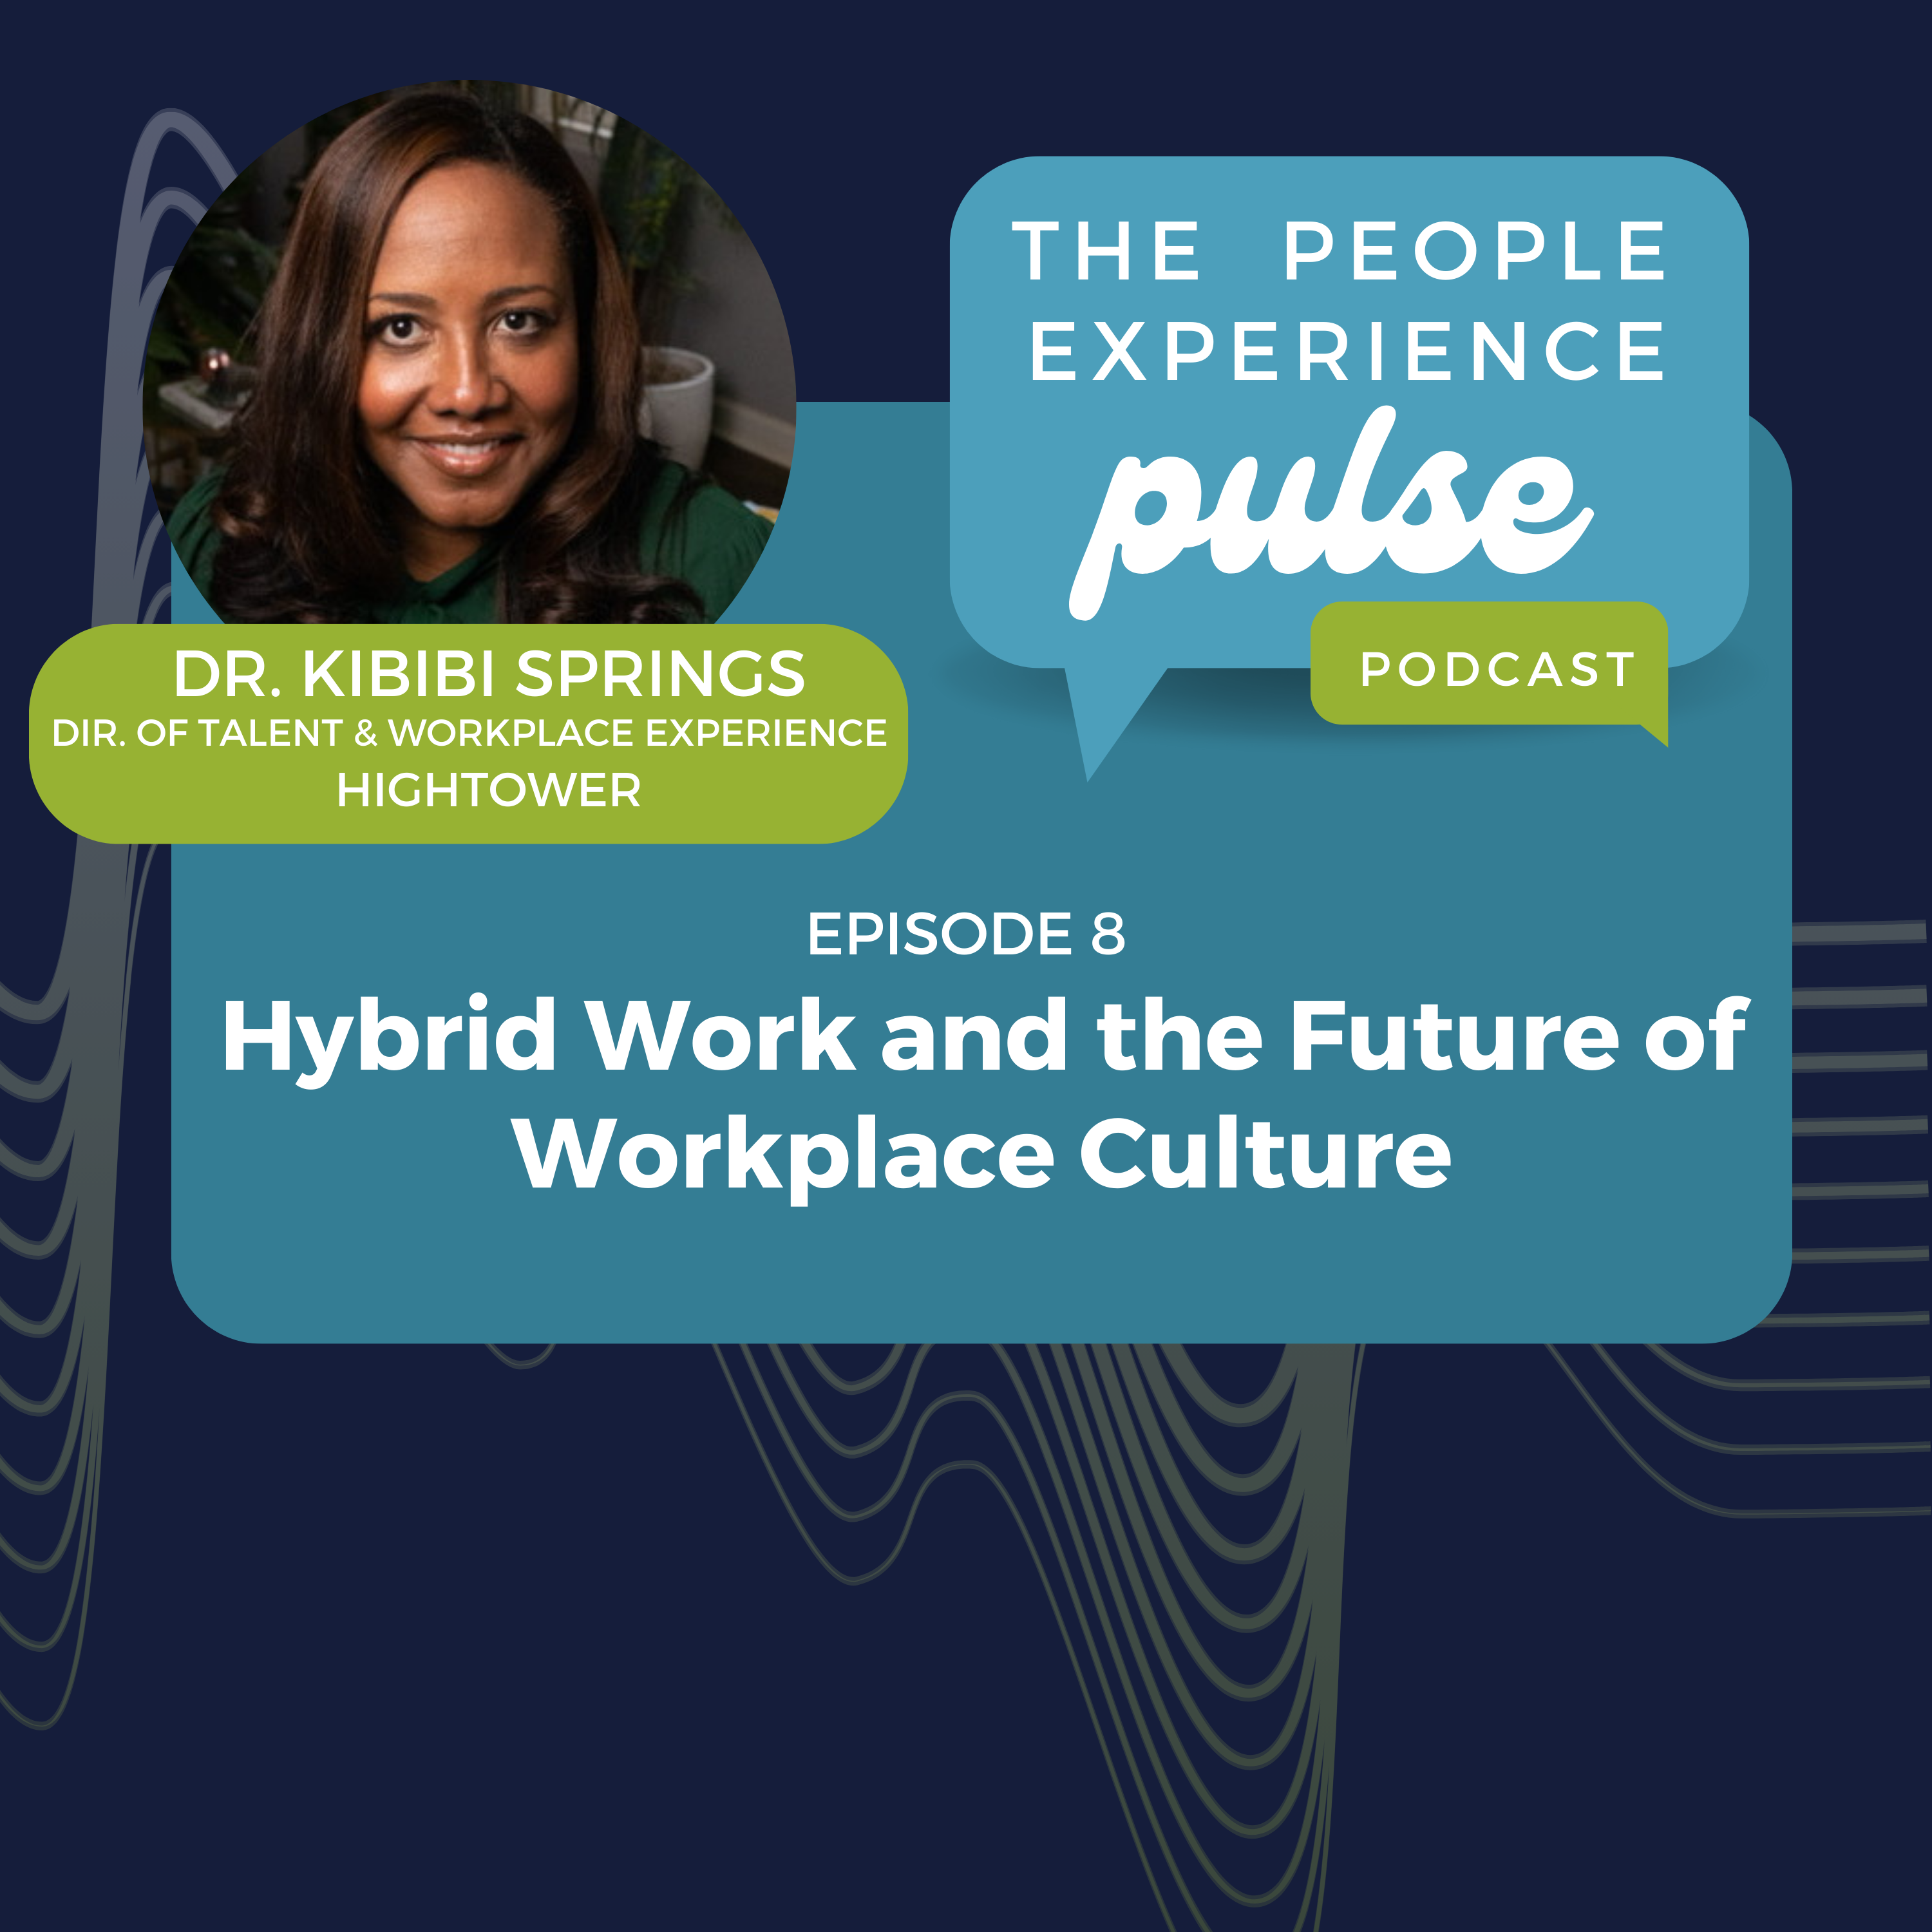 Episode 8: Hybrid Work and the Future of Workplace Culture with Dr. Kibibi Springs